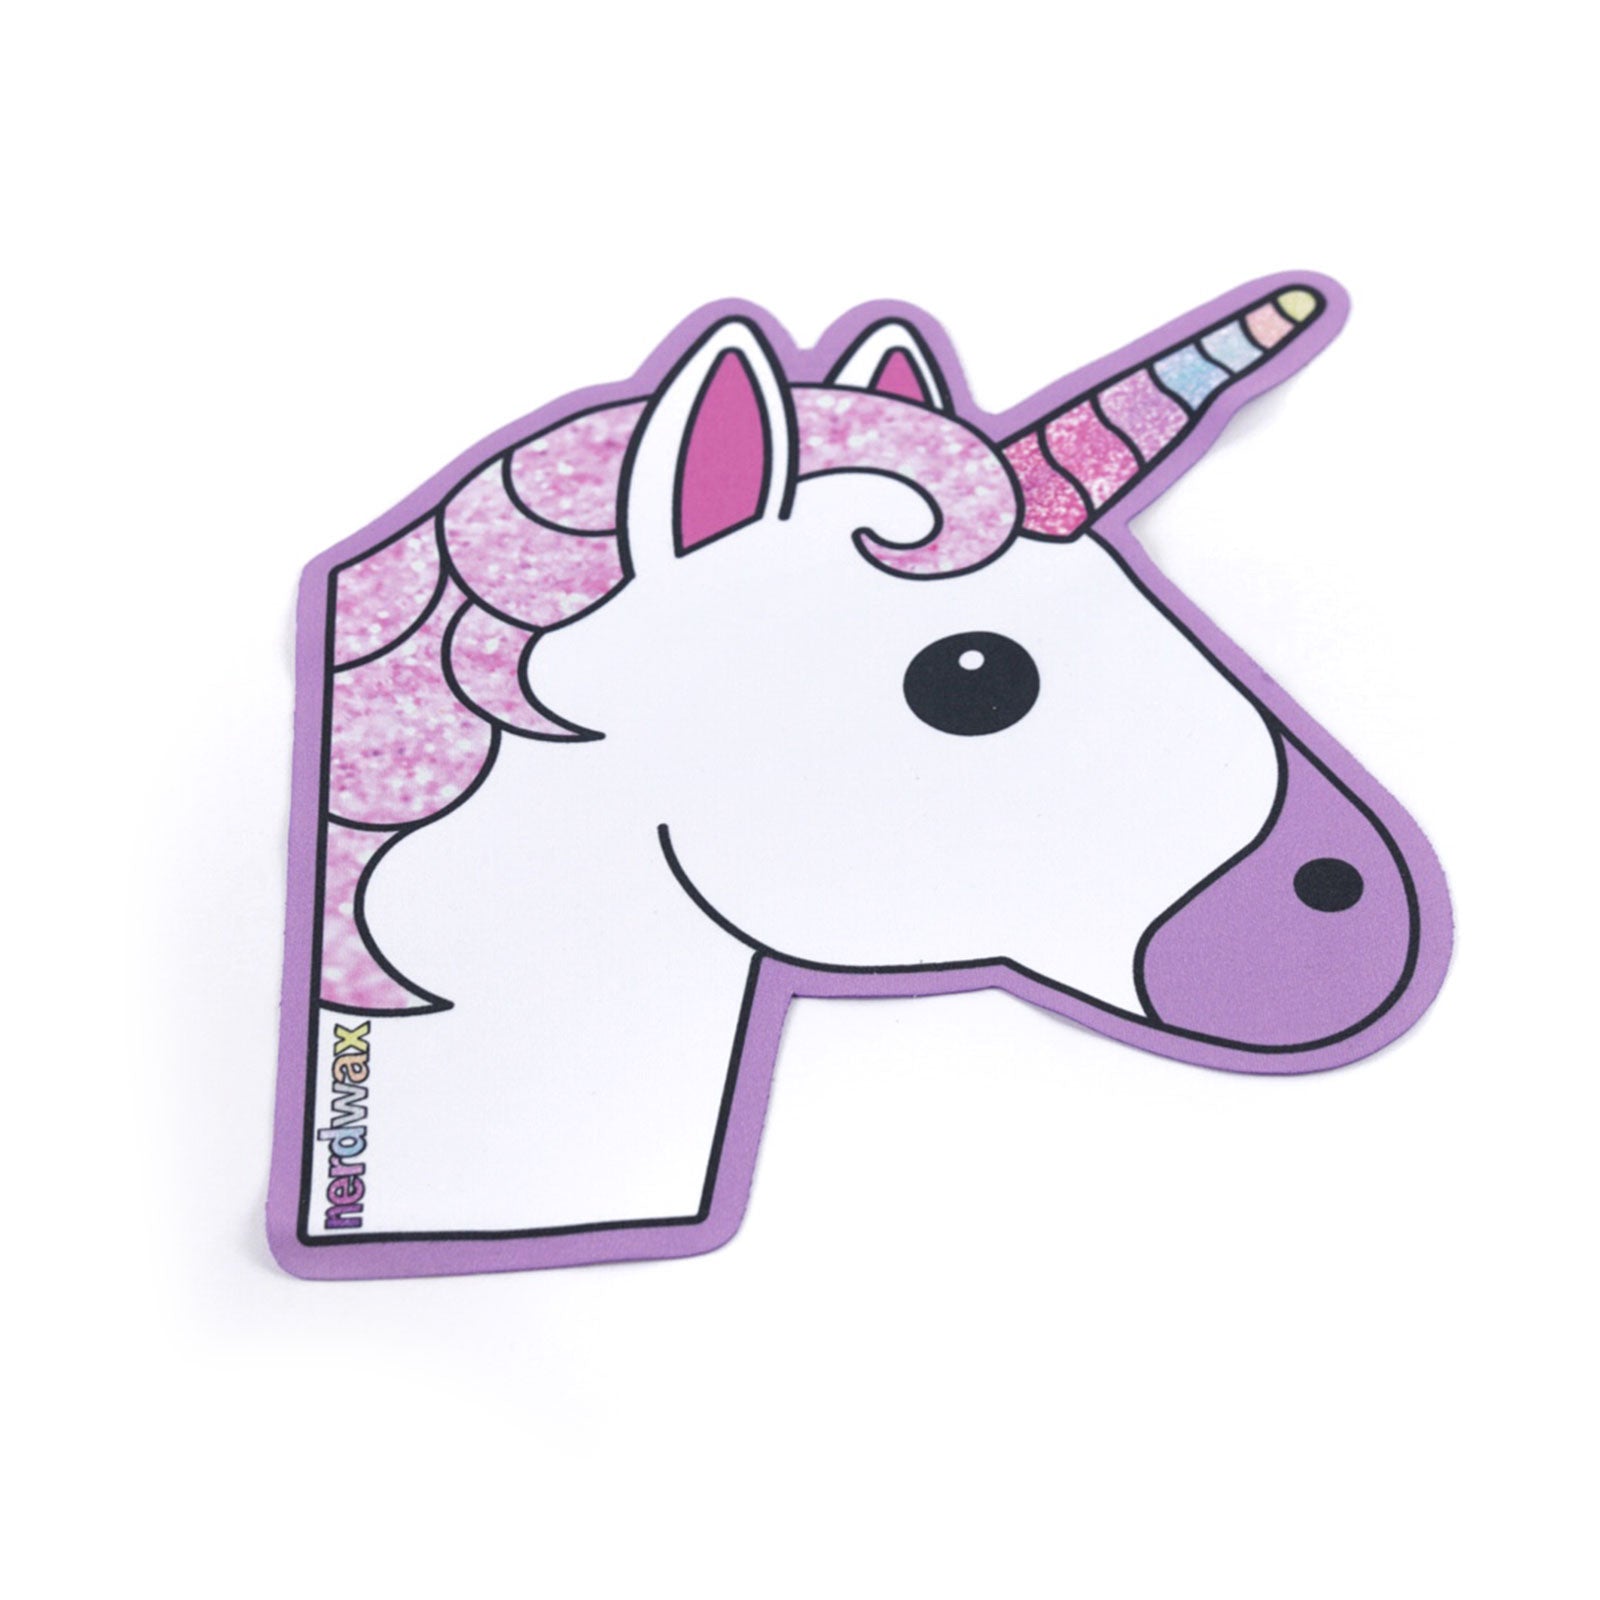 A Unicorn You Can Clean Your Glasses With Nerdwax